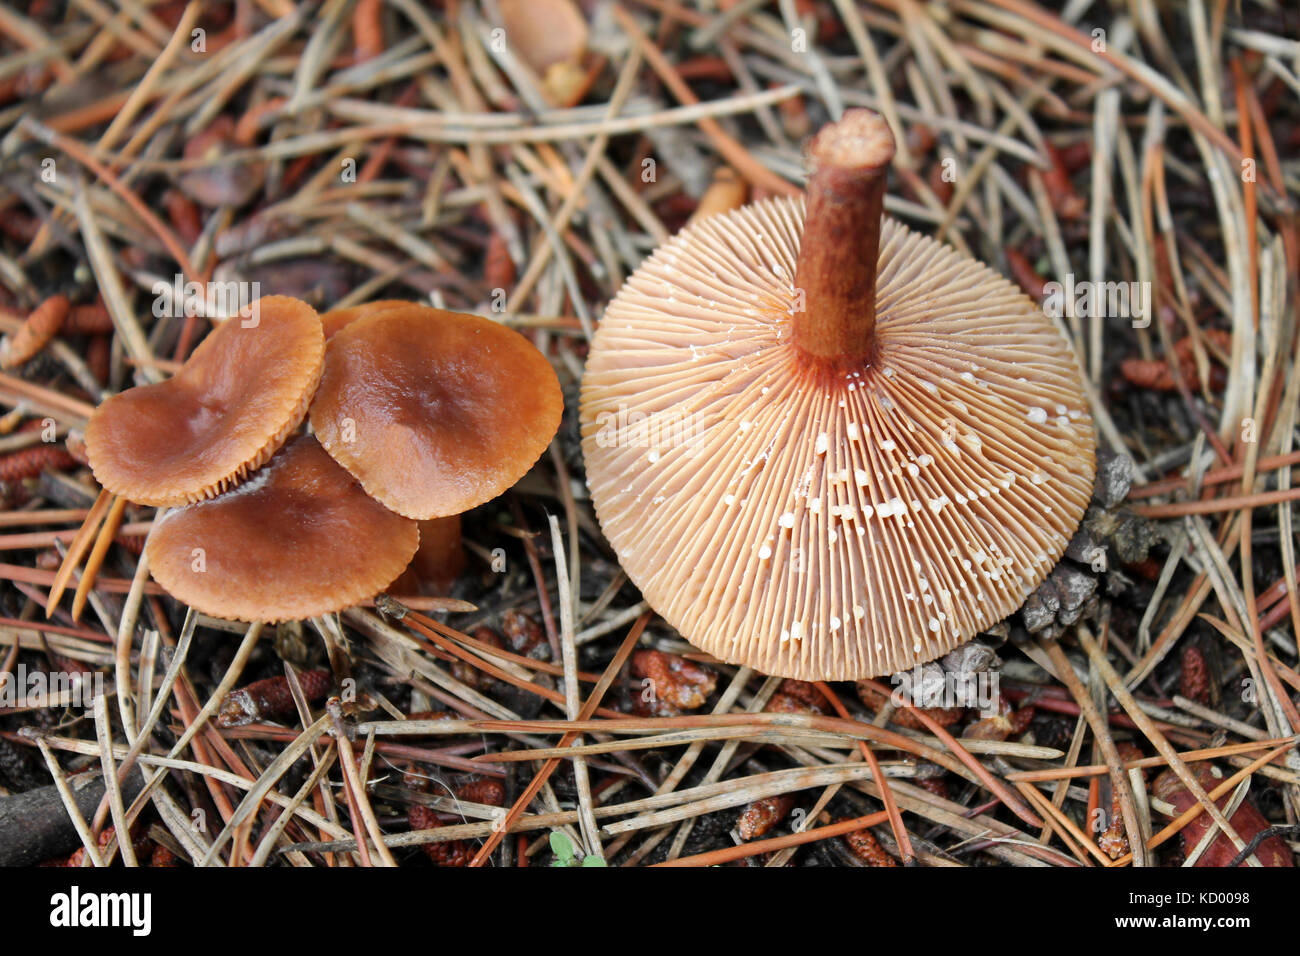 Rufous Milkcap Lactarius rufus showing the milky latex fluid they exude when damaged Stock Photo